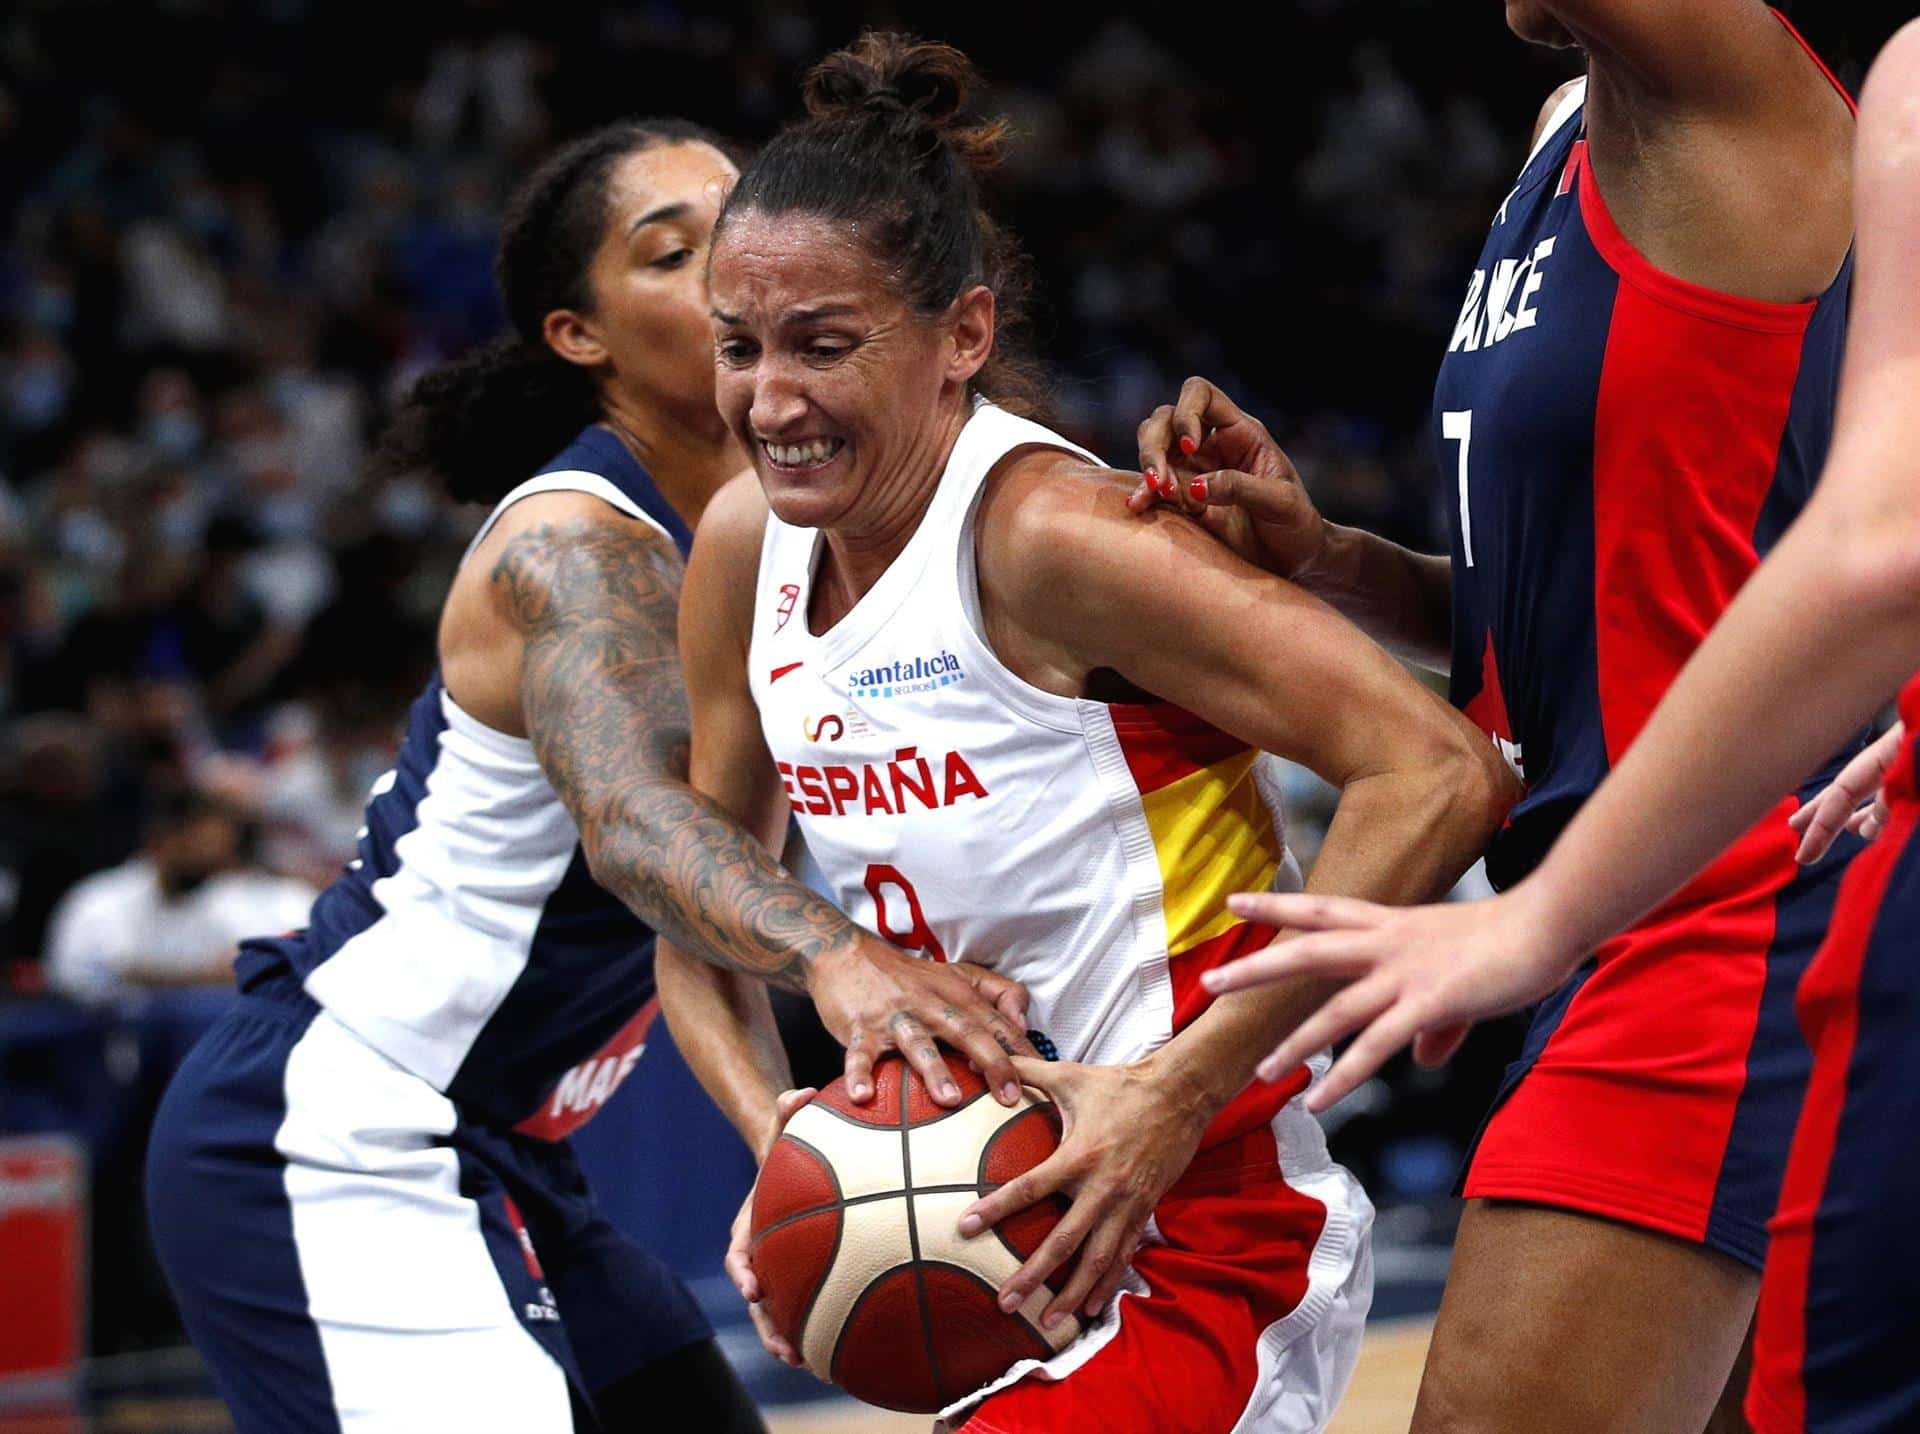 Women's basketball in Tokyo 2021: calendar and when Spain plays